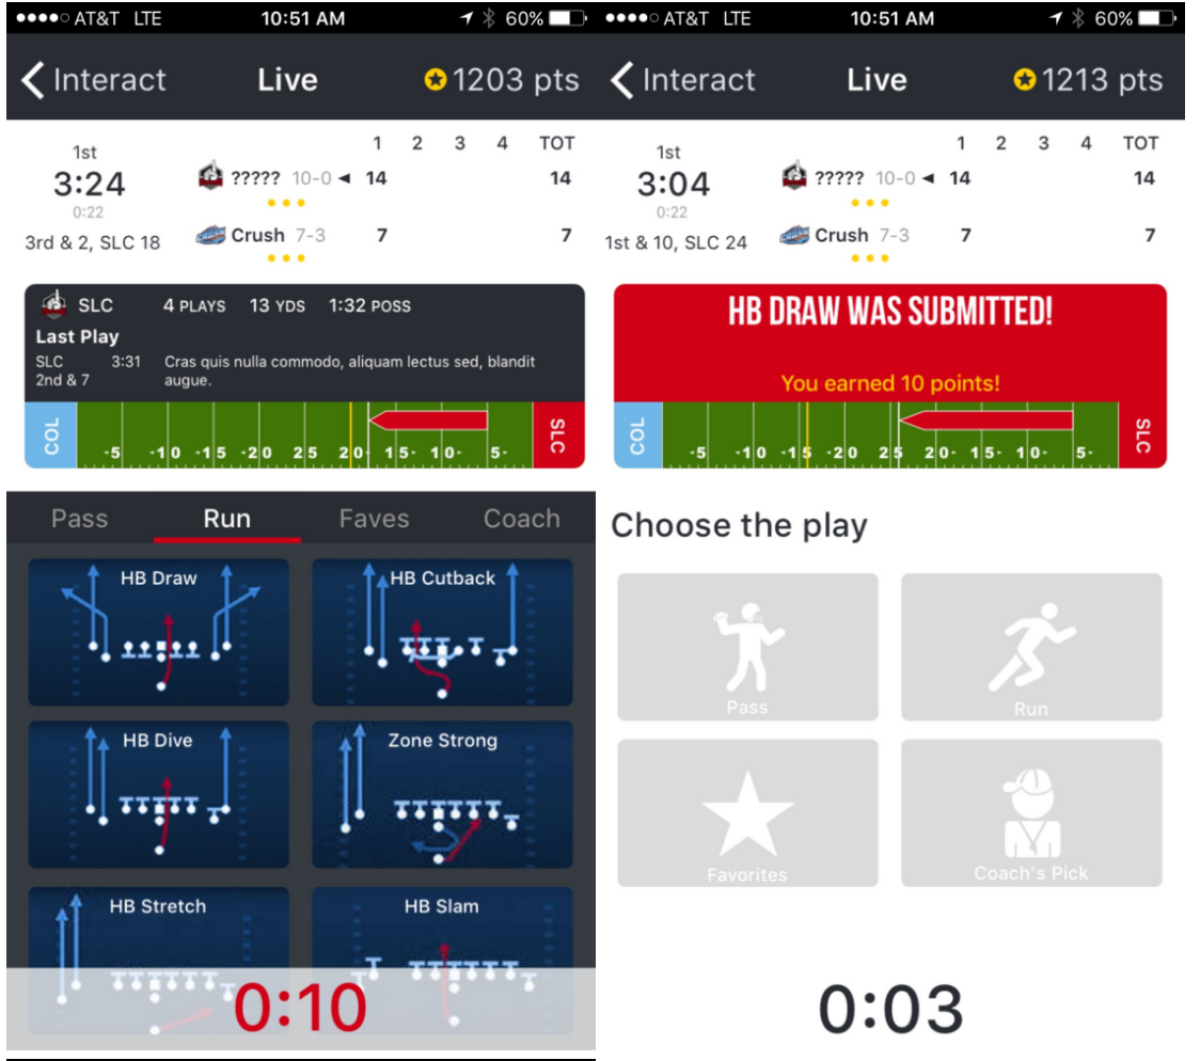 Renderings show Project Fanchise's app, which allows users to control key decisions about an Indoor Football League team. (Project Fanchise)